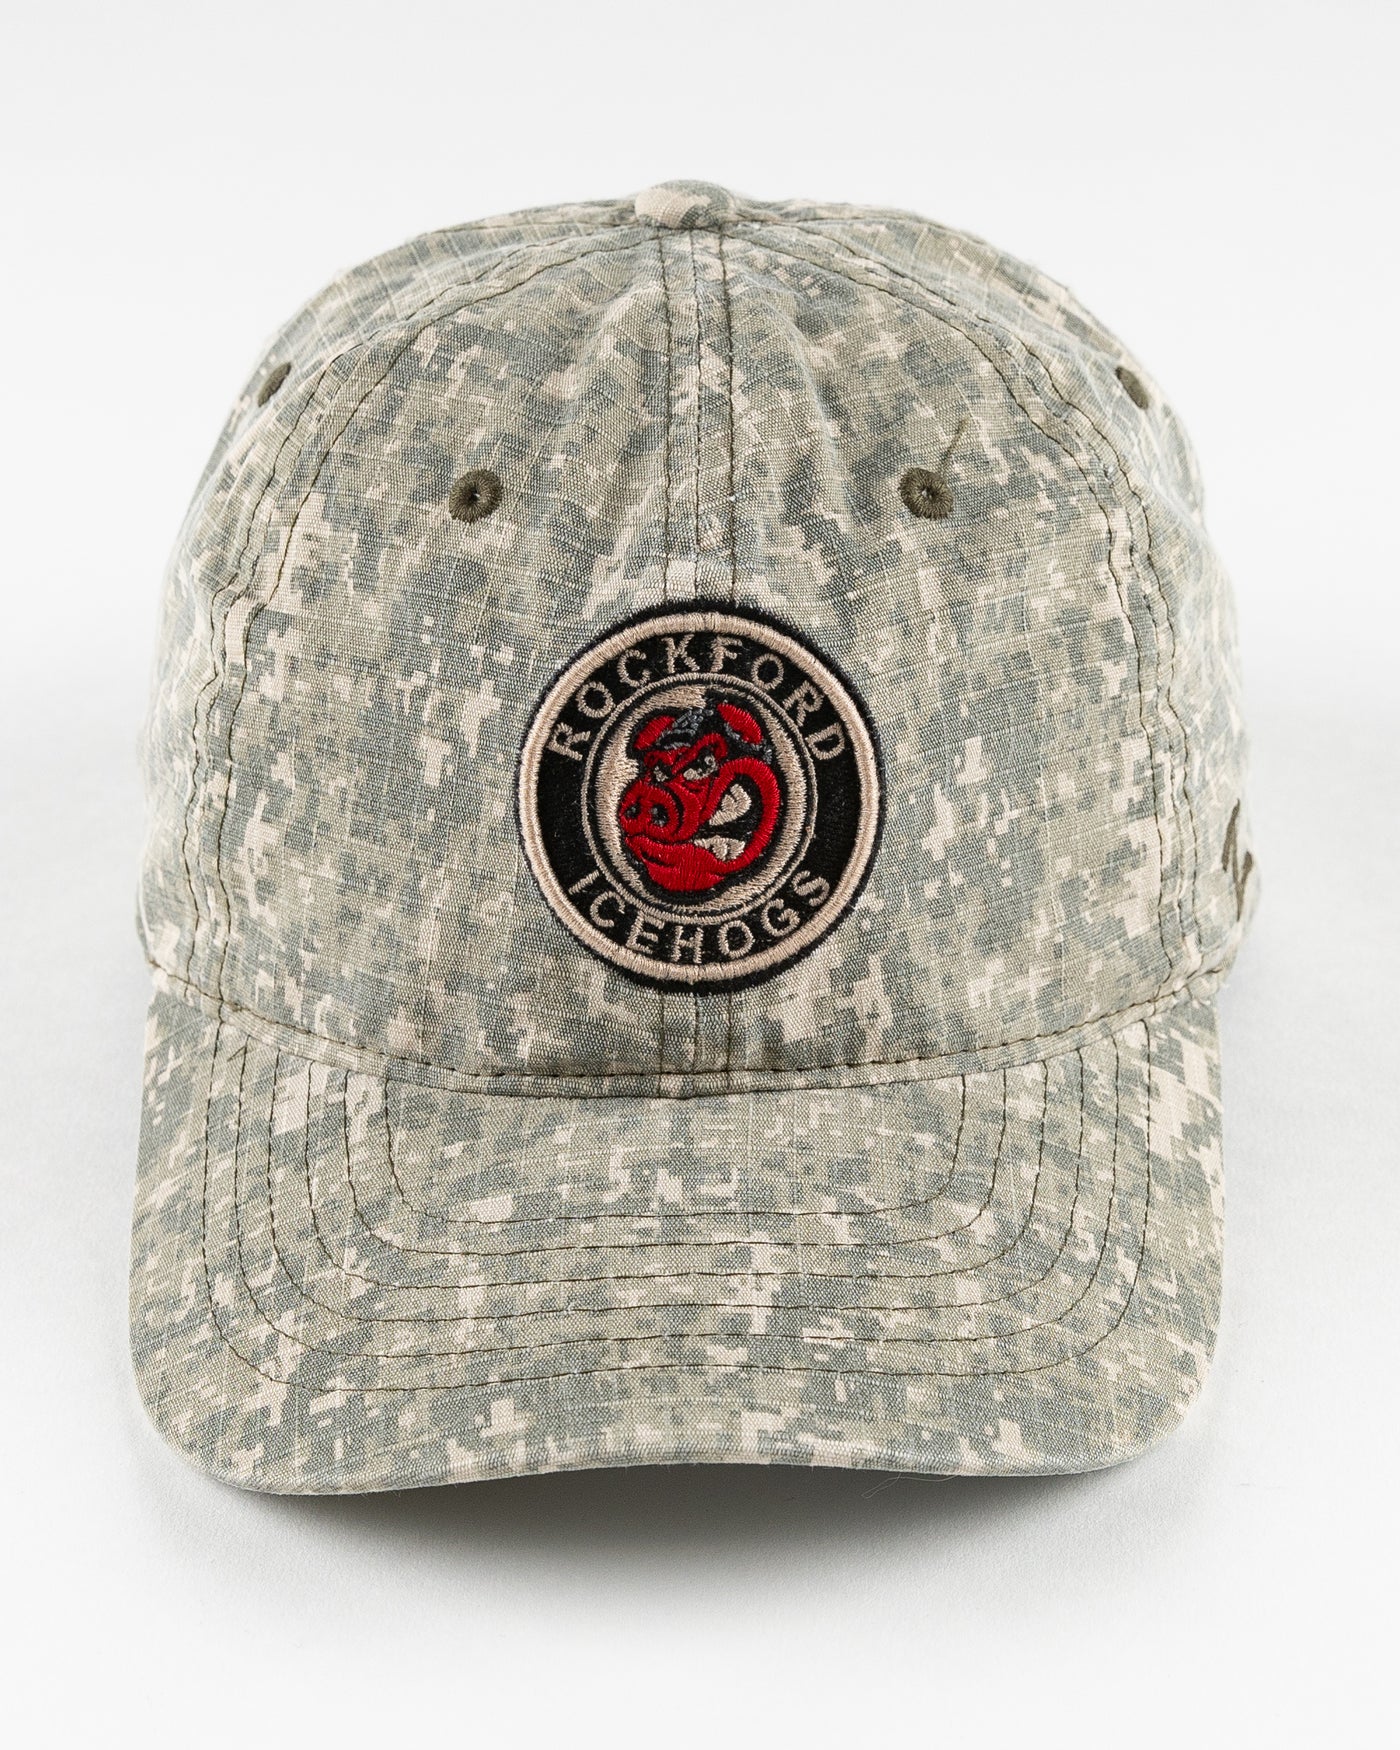 camo Rockford IceHogs adjustable cap with patch embroidered on front - front lay flat